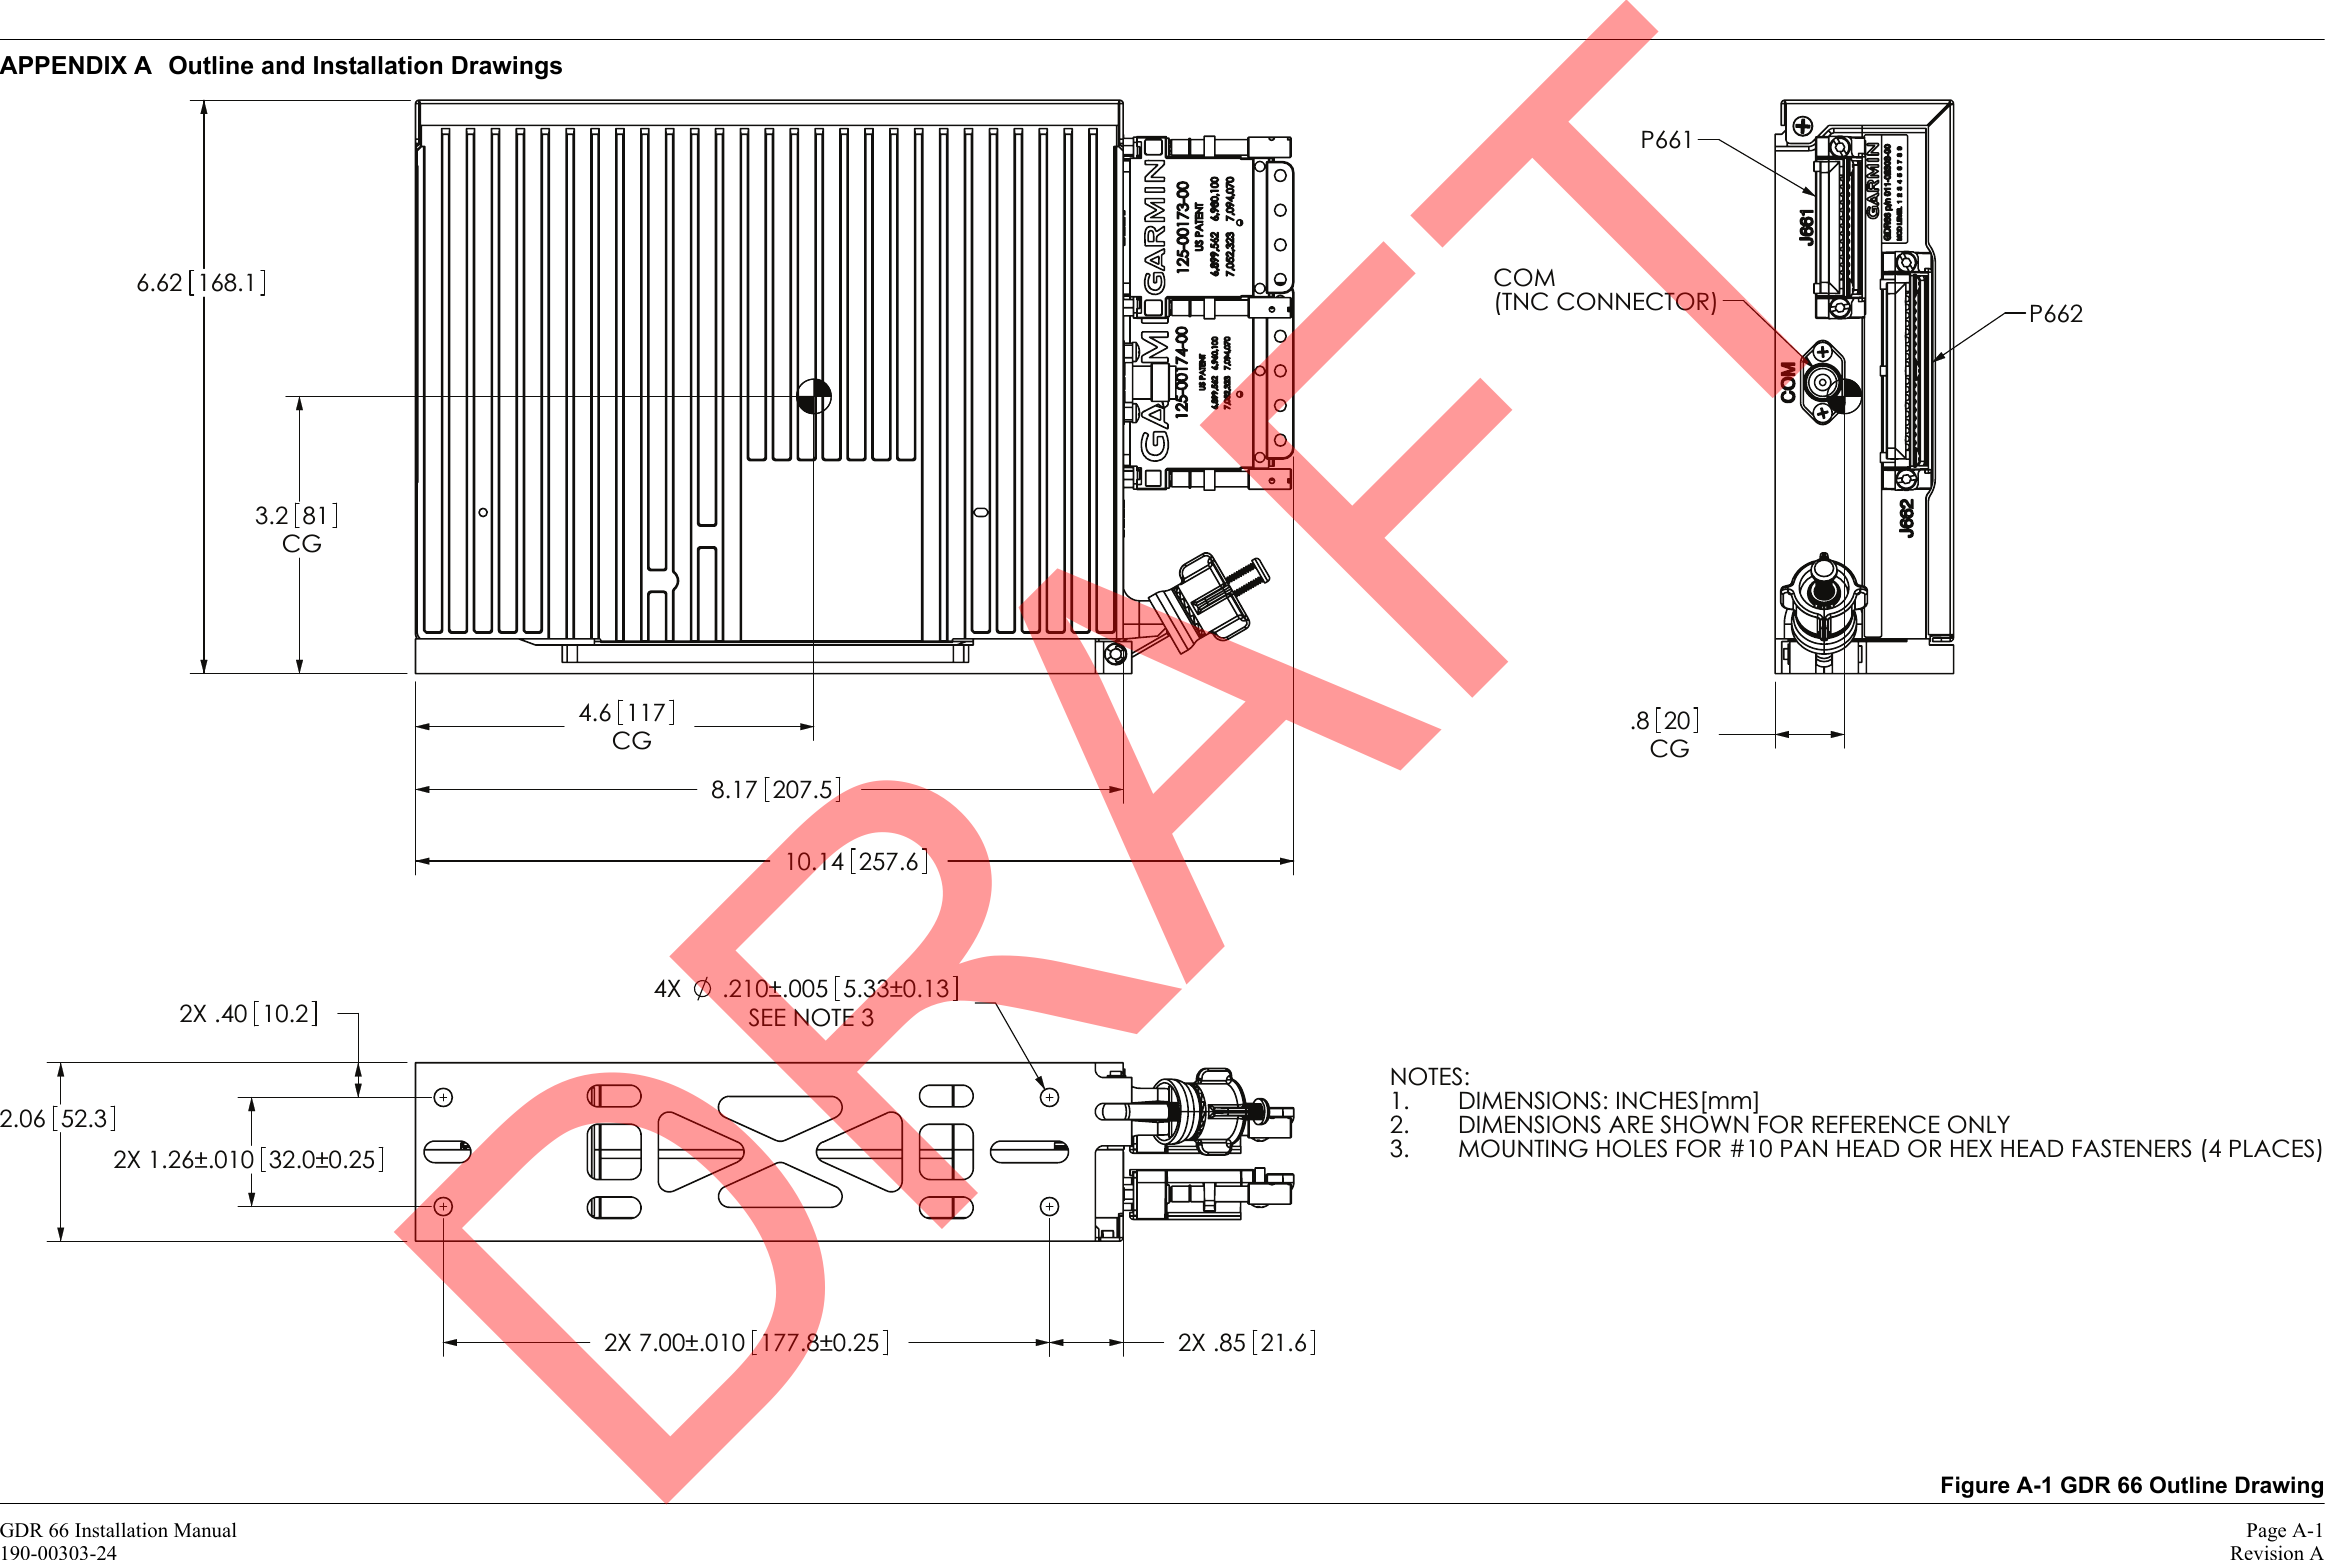 GDR 66 Installation Manual Page A-1190-00303-24 Revision AAPPENDIX A Outline and Installation DrawingsFigure A-1 GDR 66 Outline Drawing.8 20CG81CG3.21174.6CGP662P661COM(TNC CONNECTOR)NOTES:DIMENSIONS: INCHES[mm]1.DIMENSIONS ARE SHOWN FOR REFERENCE ONLY2.MOUNTING HOLES FOR #10 PAN HEAD OR HEX HEAD FASTENERS (4 PLACES)3.SEE NOTE 3±.005±0.25±0.13±.010 177.82X7.002X5.331.2652.3.21010.22.06±.010.4032.0±0.254X2X2X .85 21.610.14 257.66.62 168.18.17 207.5DRAFT